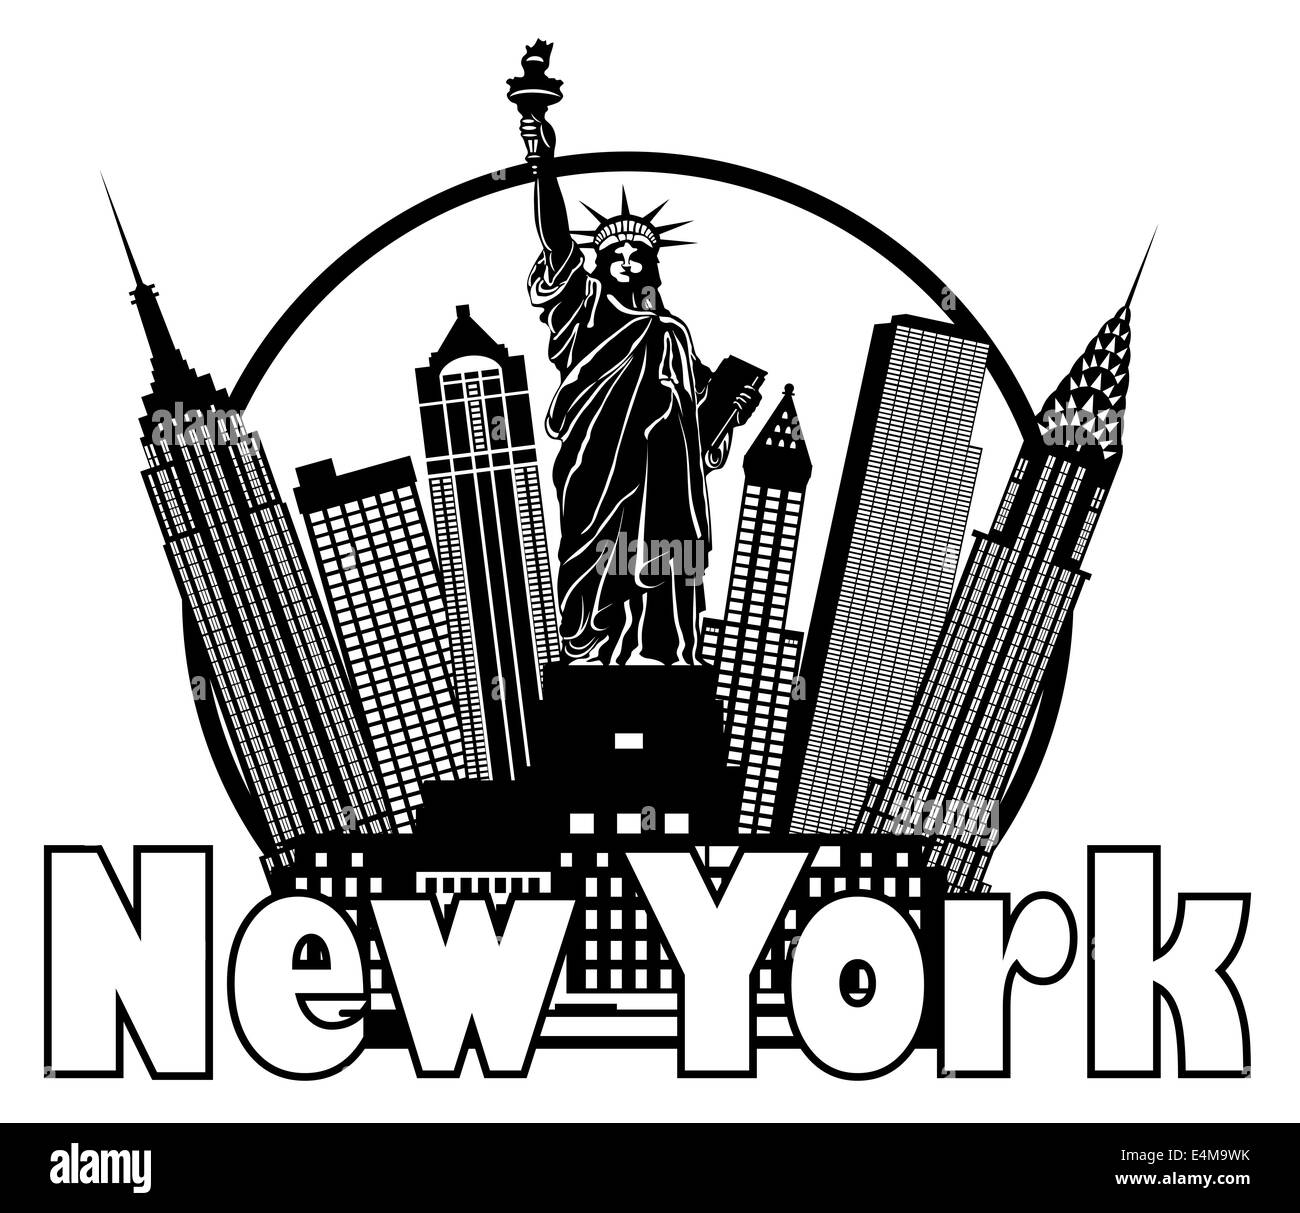 New York City Skyline with Statue of Liberty Black and White Circle Outline with Text Illustration Stock Photo